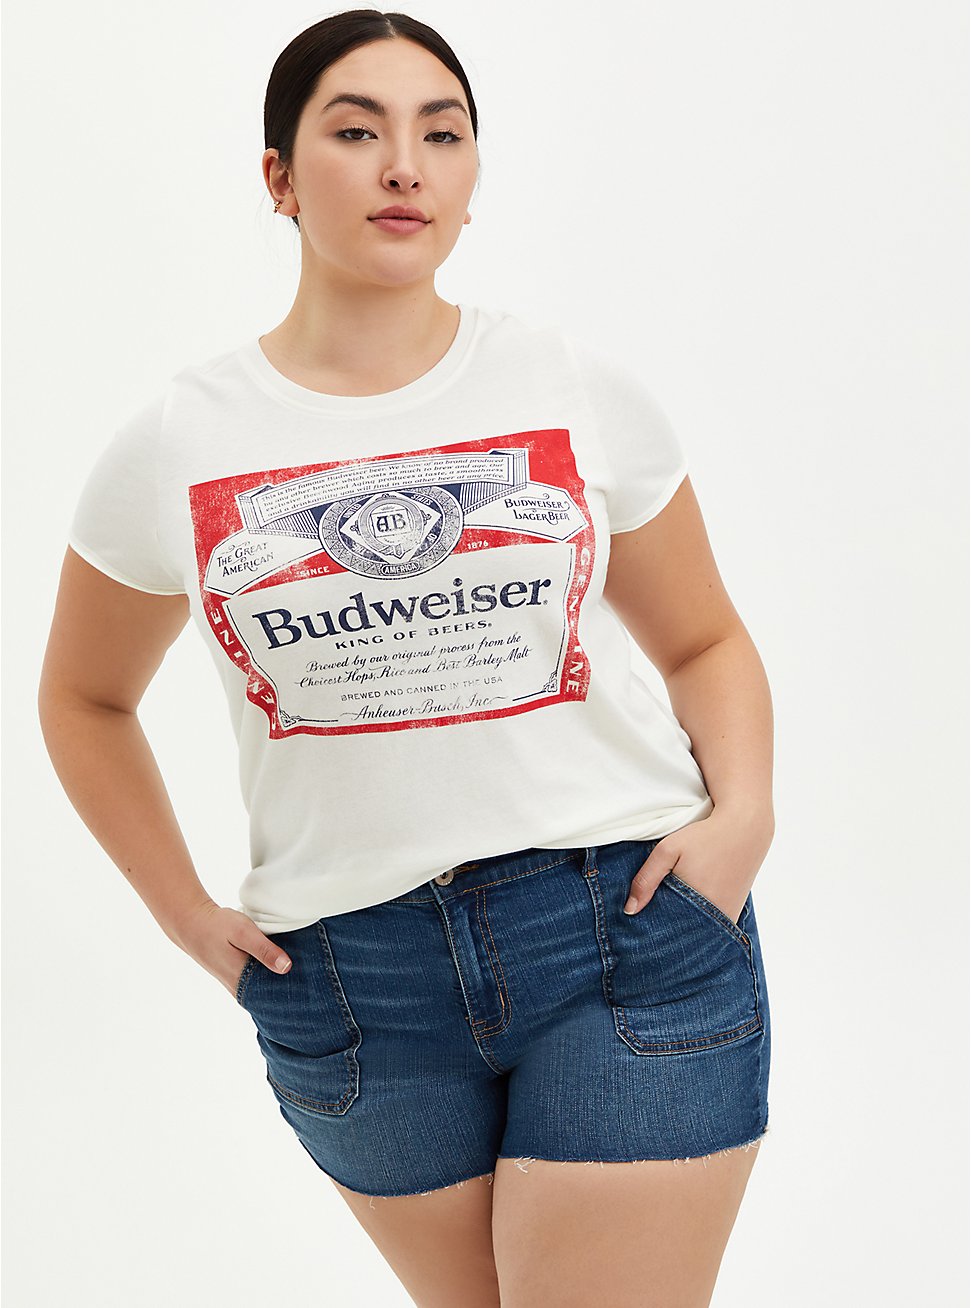 Plus Size Classic Fit Crew Tee - Budweiser White  , BRIGHT WHITE, hi-res